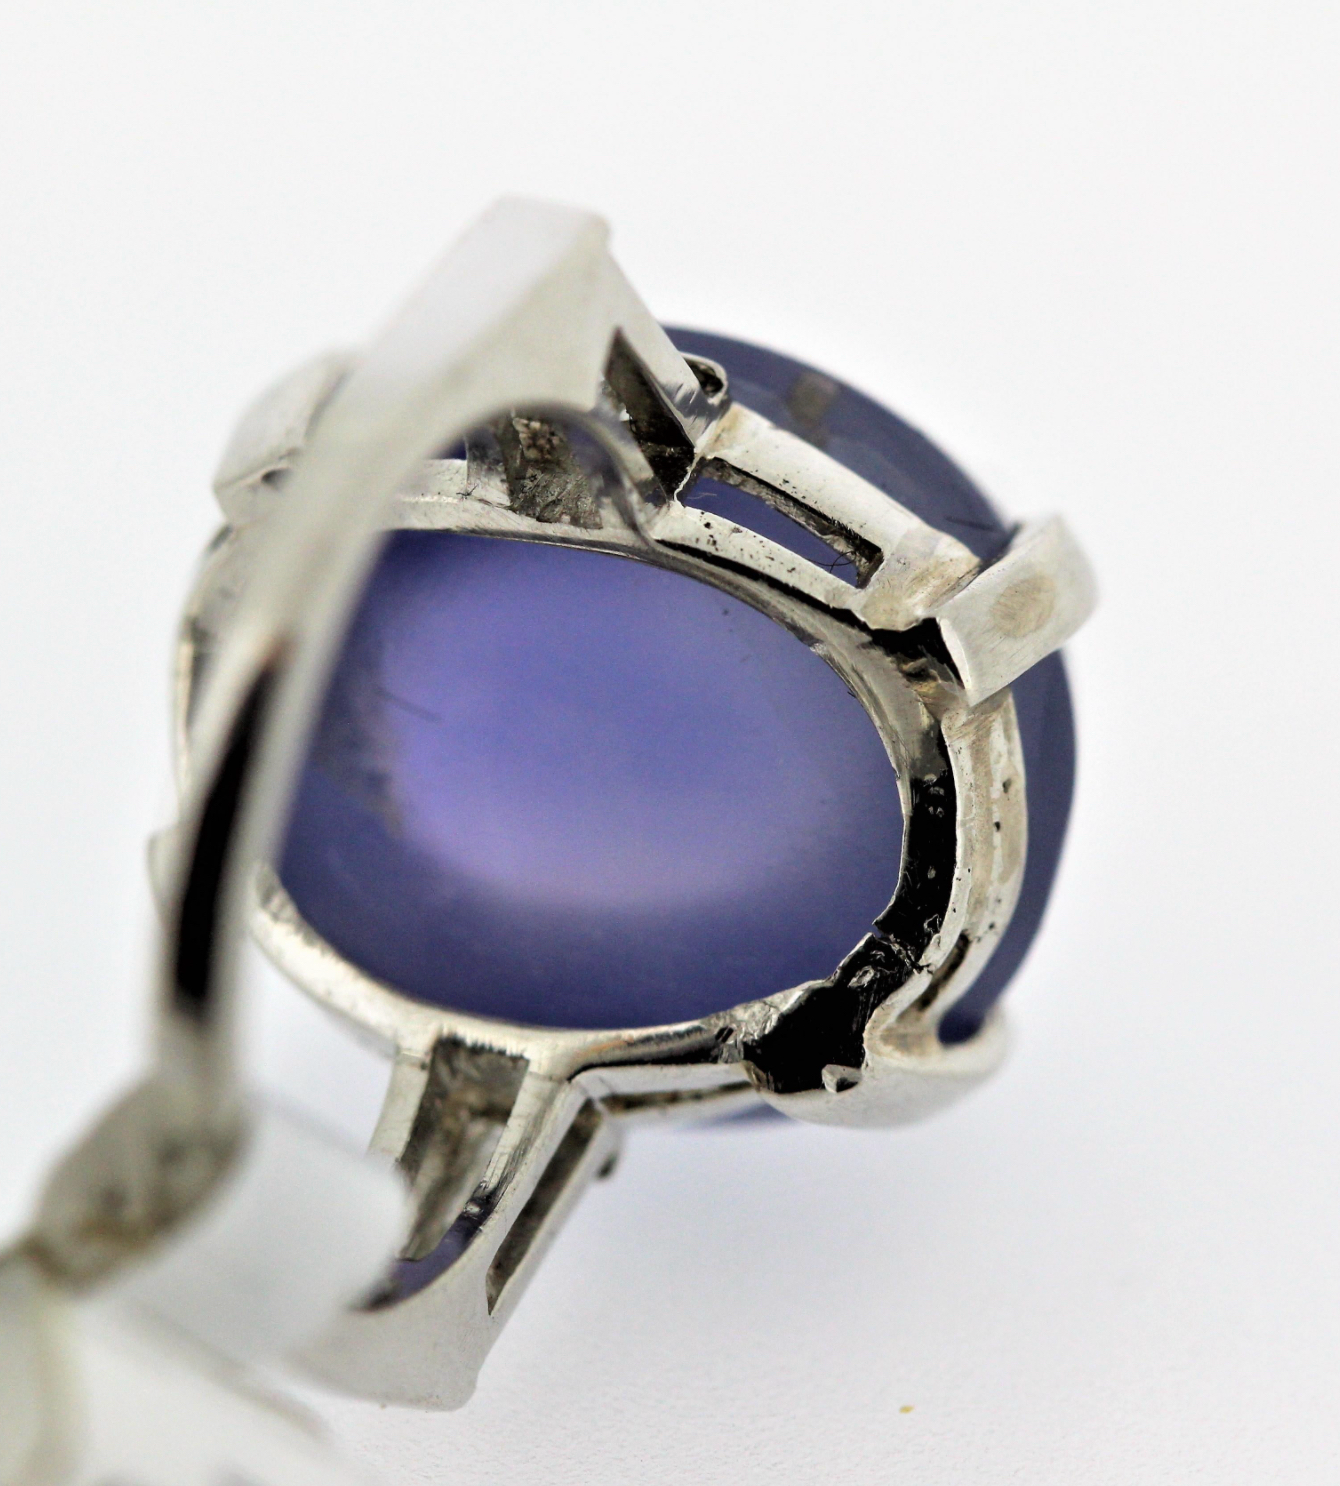 6x8mm Real Blue Star Sapphire Ring in 925 Silver Sterling | eBay